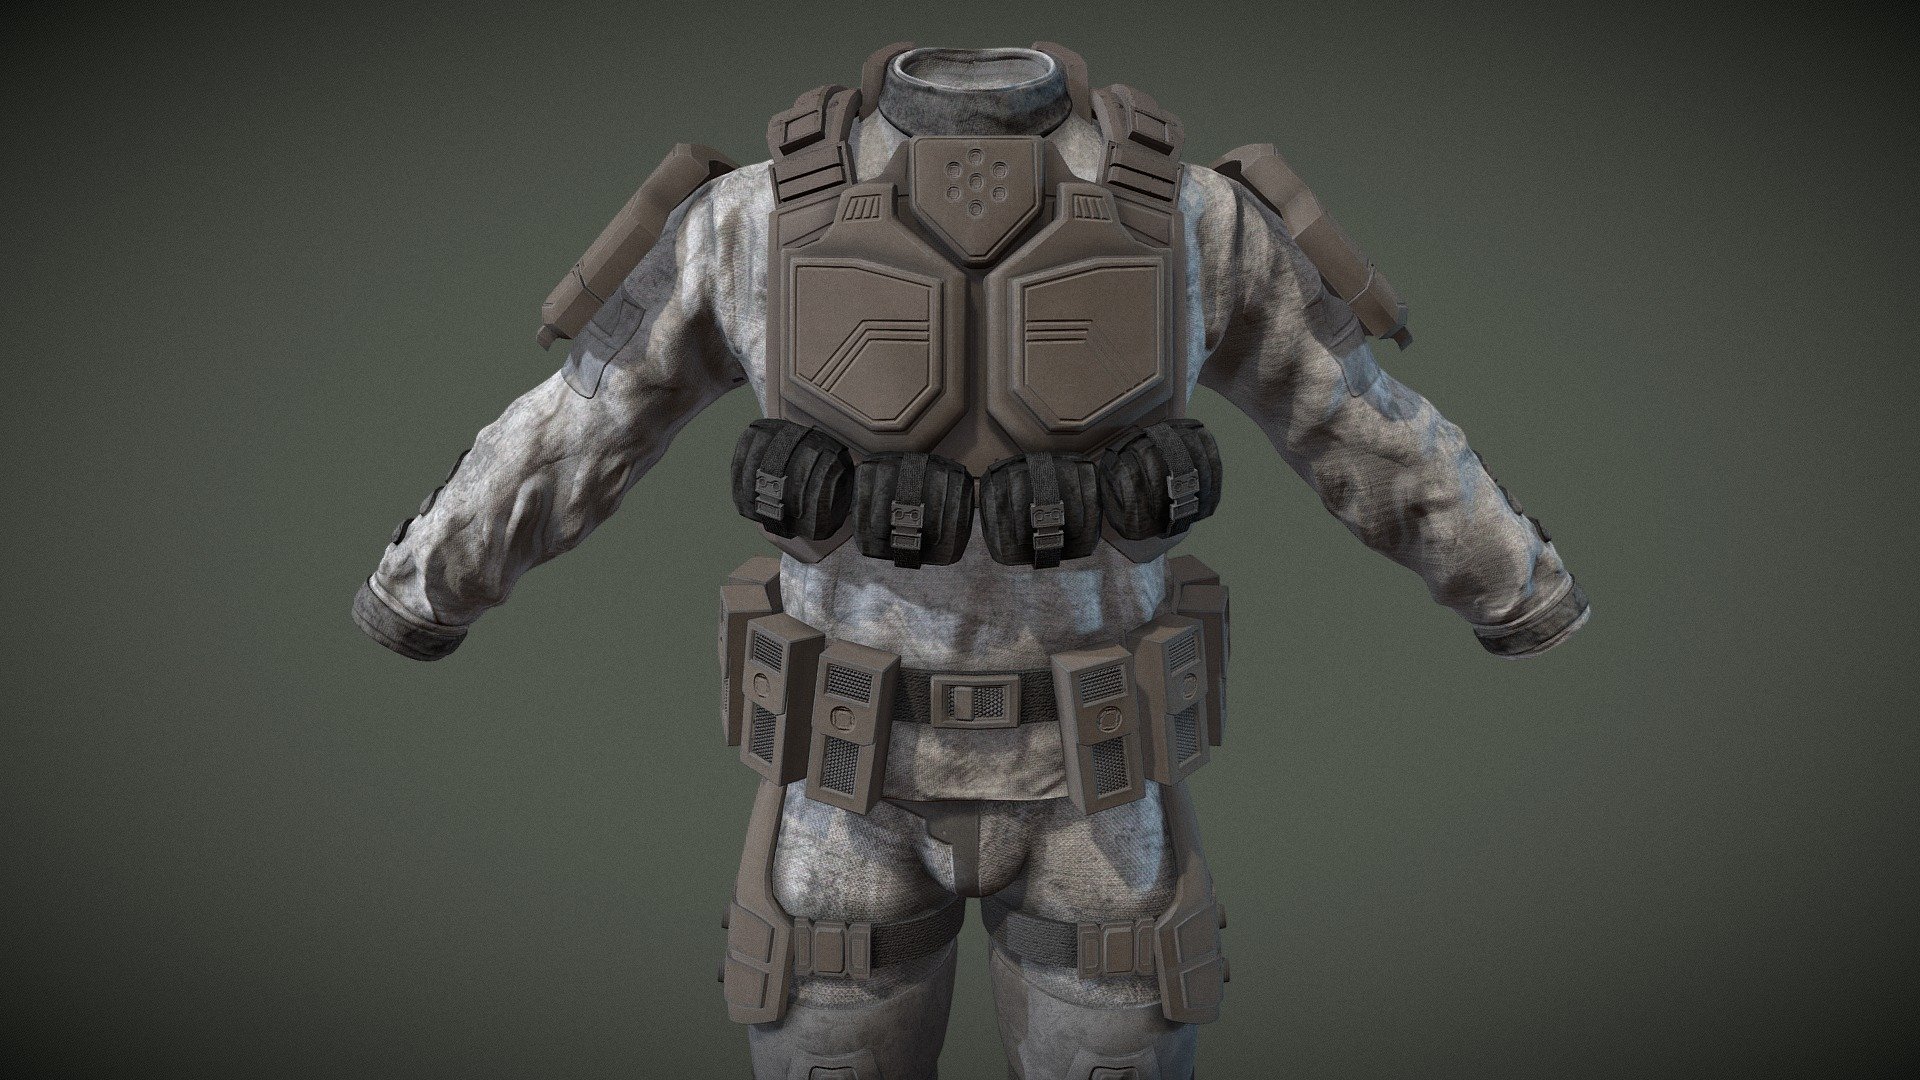 Halo Marine Armor inspired from Halo Reach and Halo 2 Model/Art by Outworld Studios

Must give credit to Outworld Studios if using the asset.

Show support by joining my discord: https://discord.gg/EgWSkp8Cxn - Halo Marine Armor - Halo Reach/Halo2 - Buy Royalty Free 3D model by Outworld Studios (@outworldstudios) 3d model